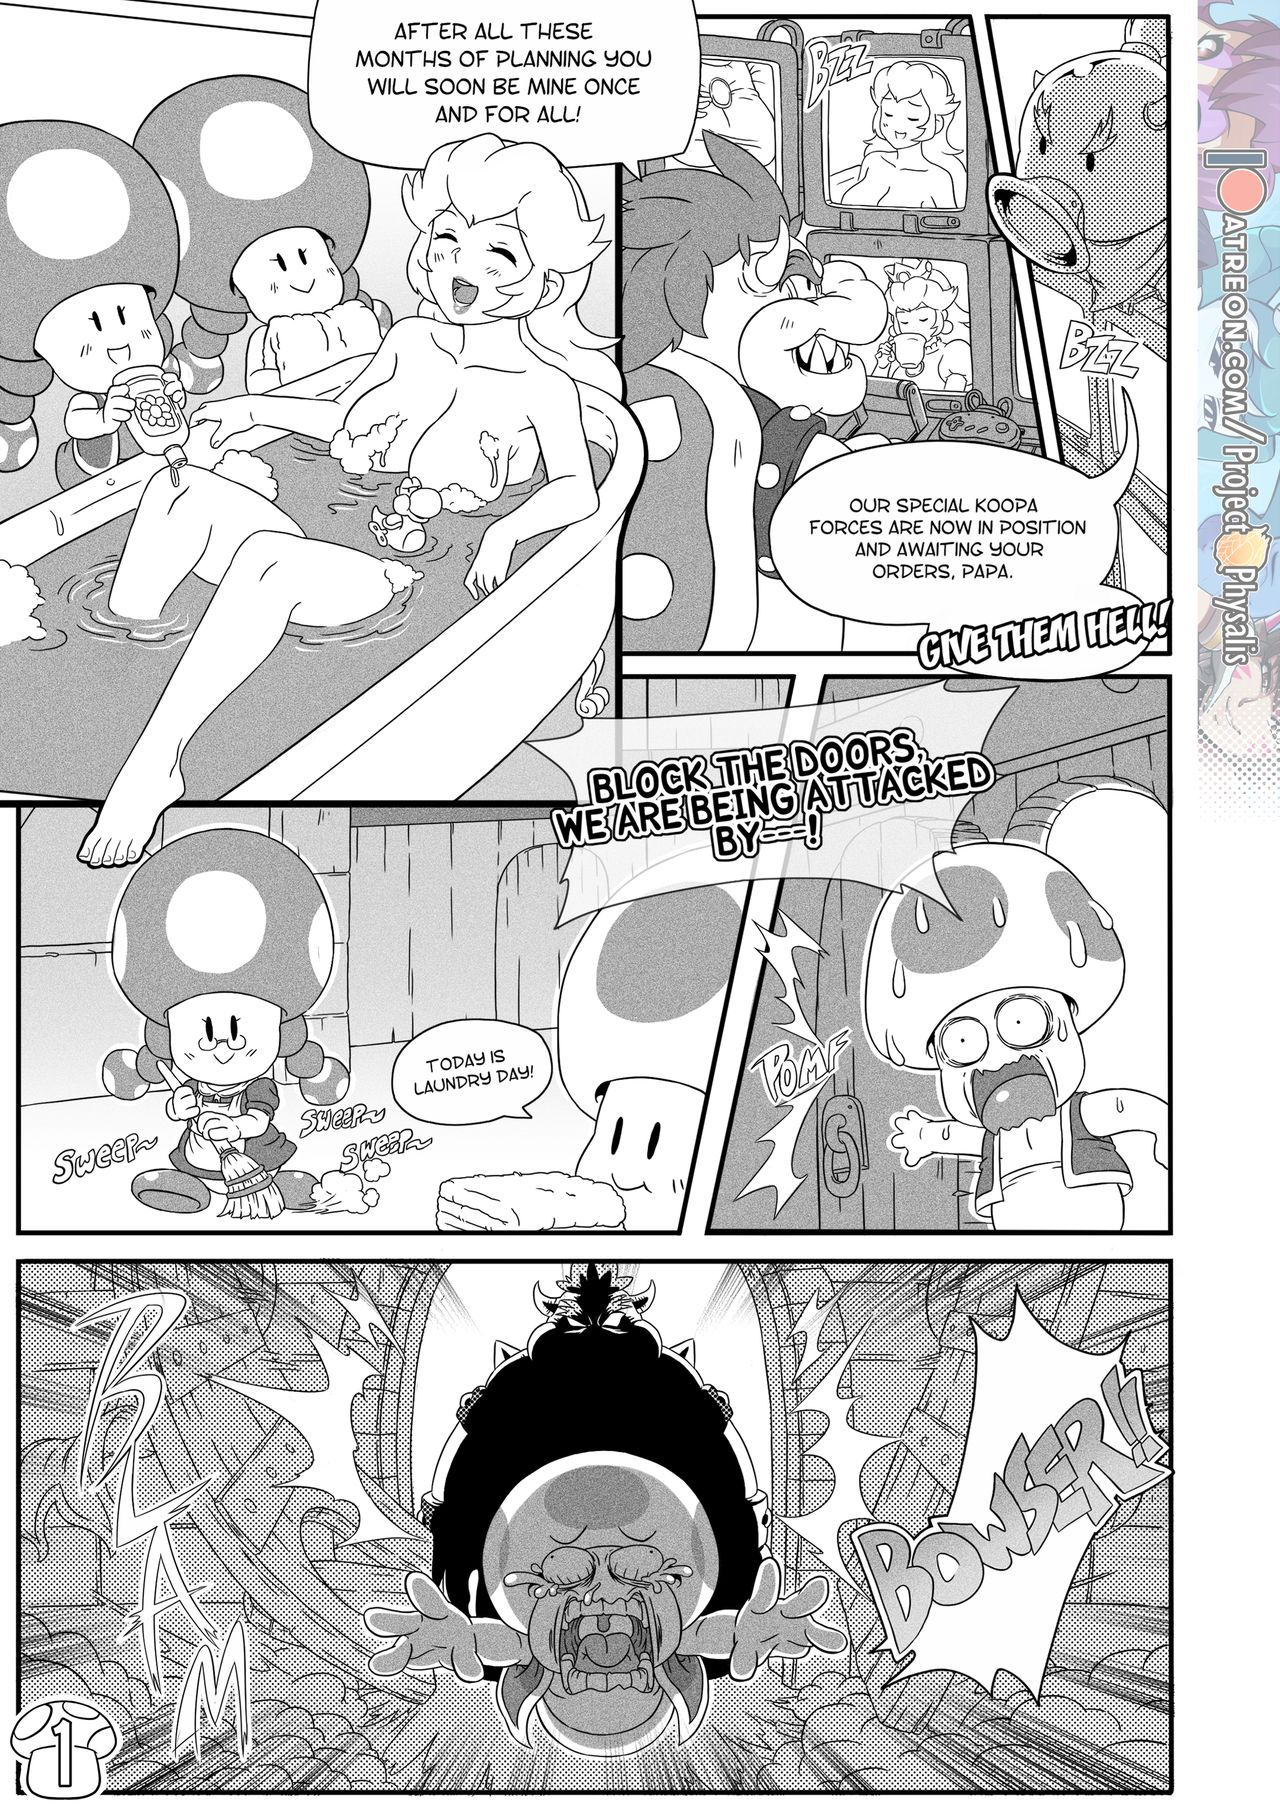 [Project physalis] Princess Conquest (Super Mario Bros.)(Ongoing) 2